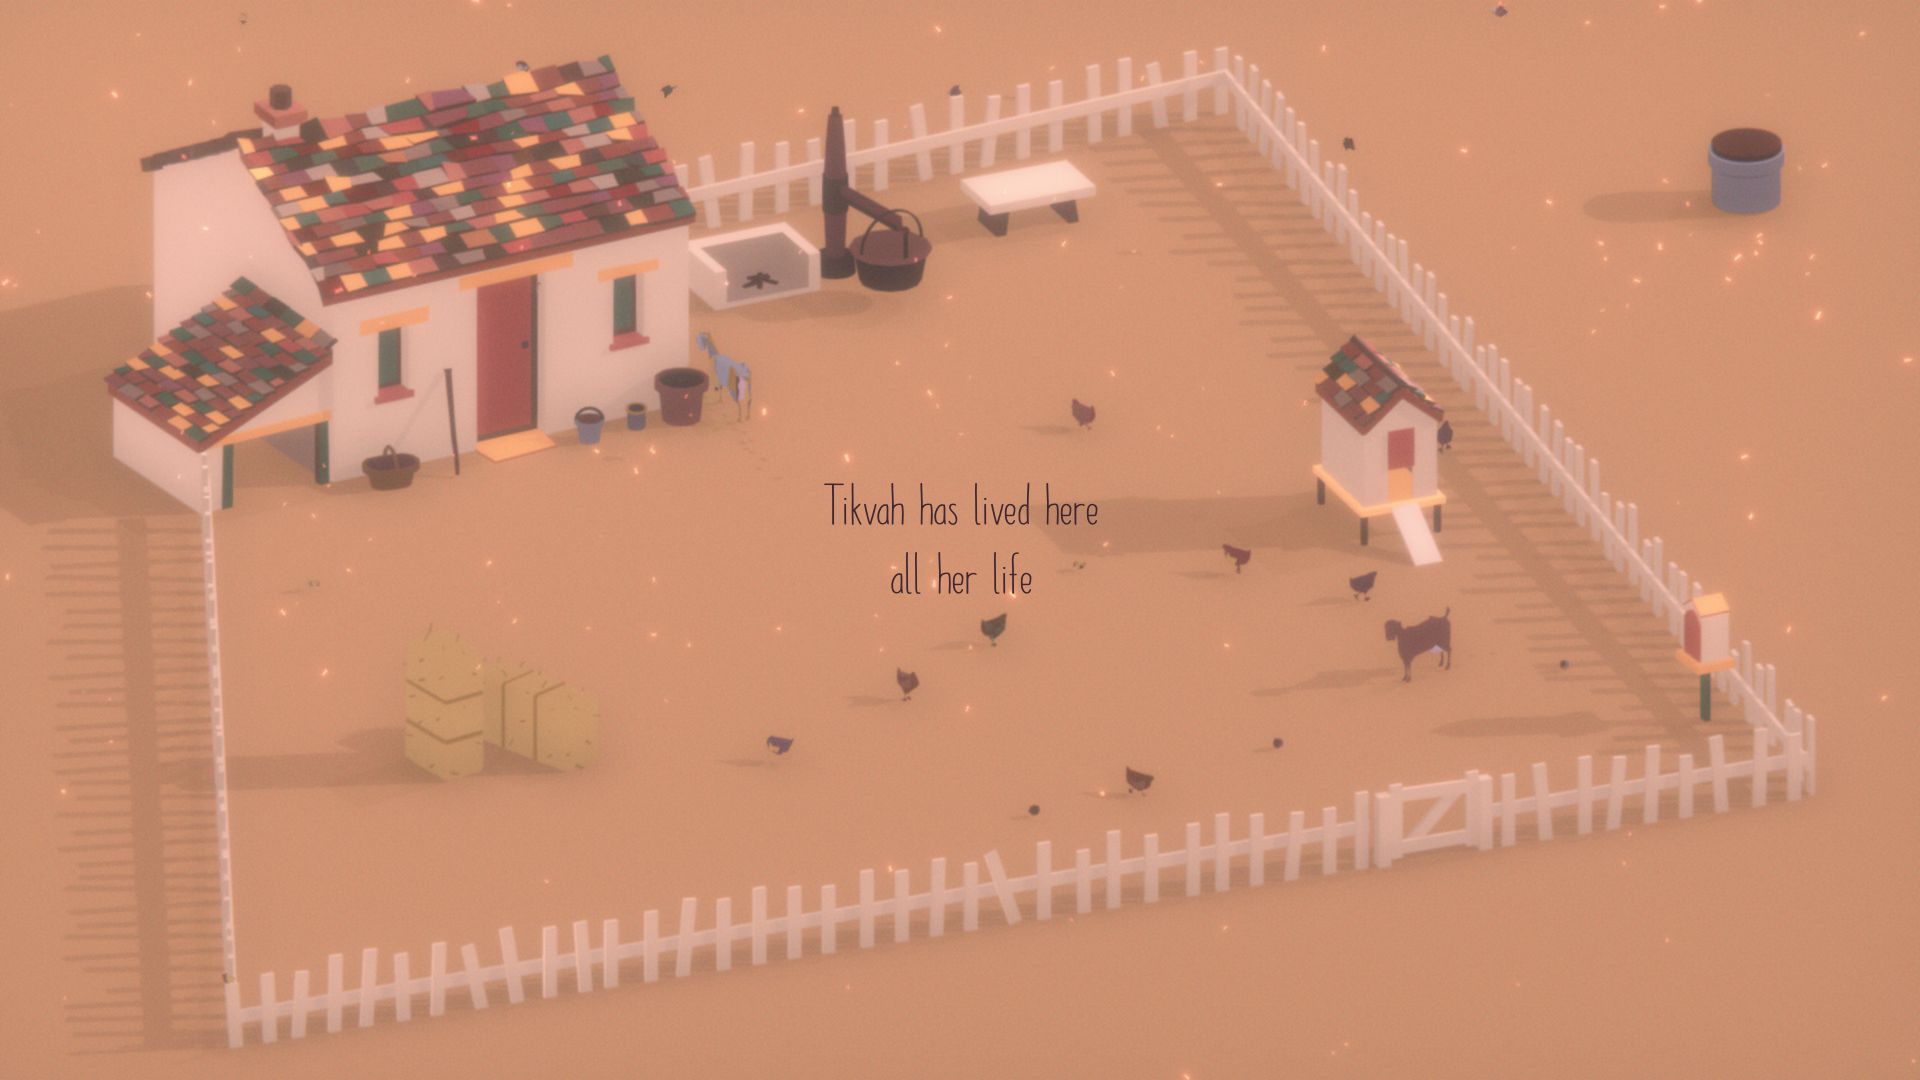 Where the Goats Are is like Stardew Valley but all you have are goats chickens and crushing loneliness